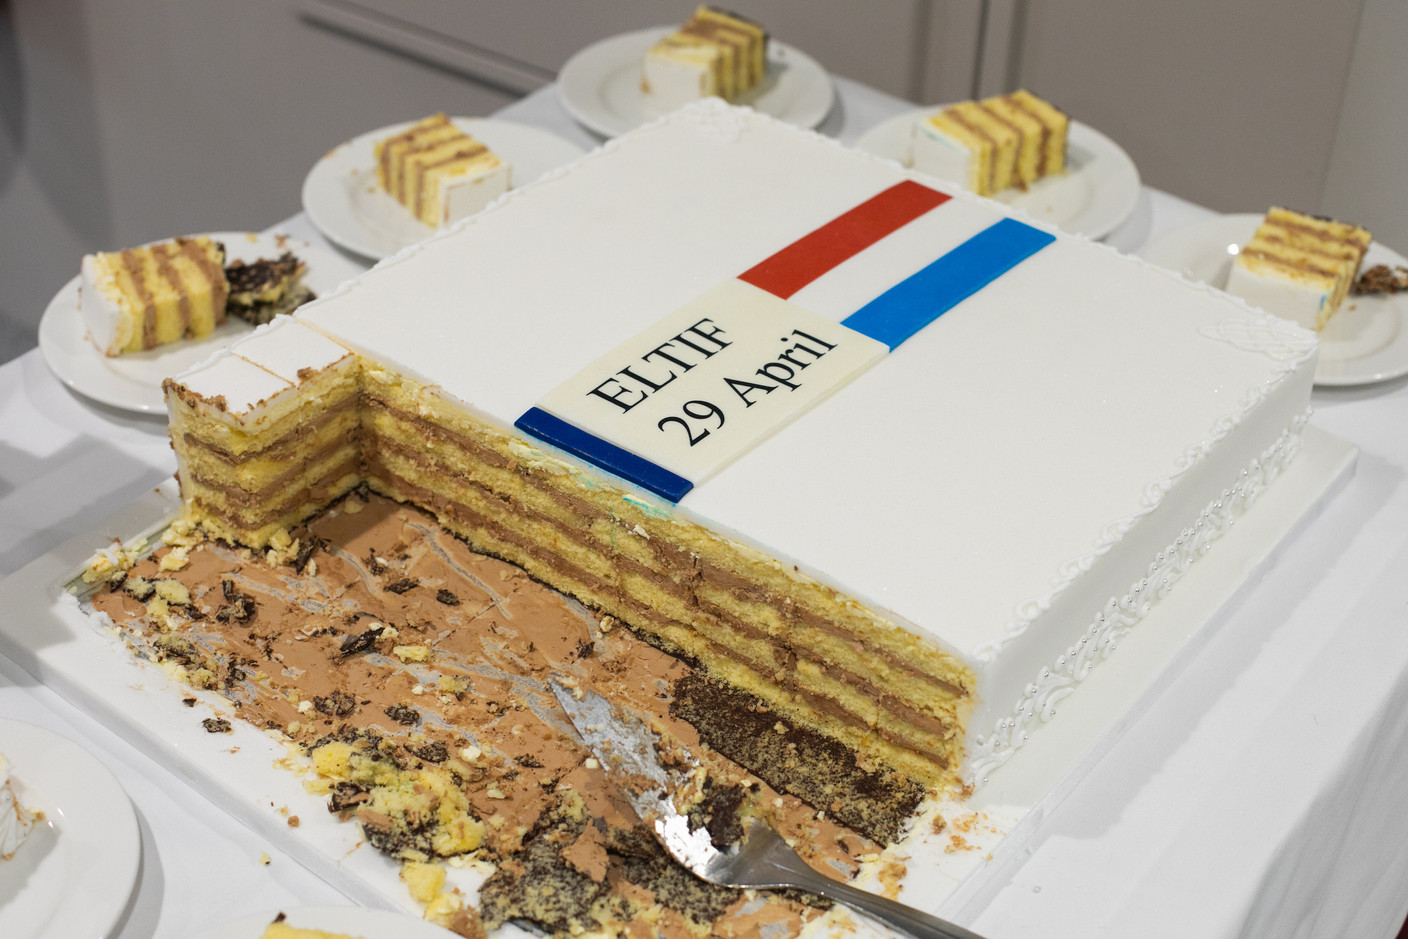 Delano can confirm that the cake was very tasty. Photo: Matic Zorman / Maison Moderne